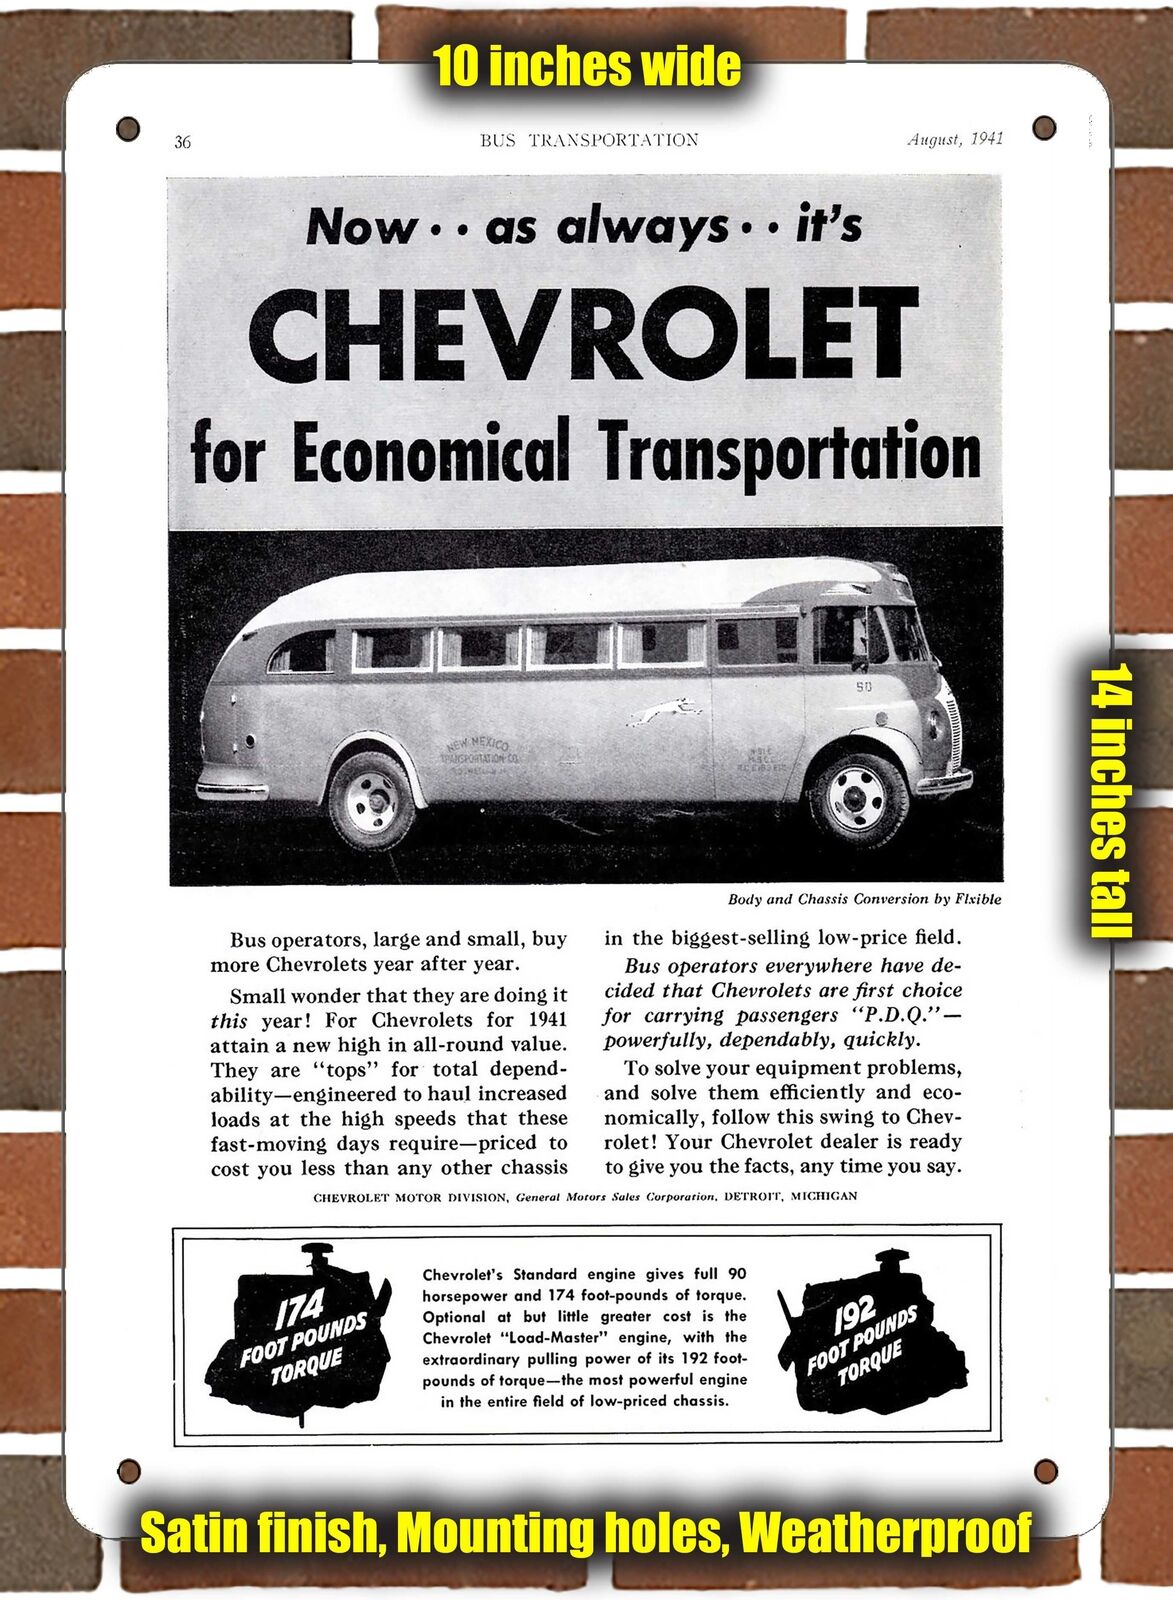 Metal Sign - 1941 Chevrolet Bus by Flxible- 10x14 inches